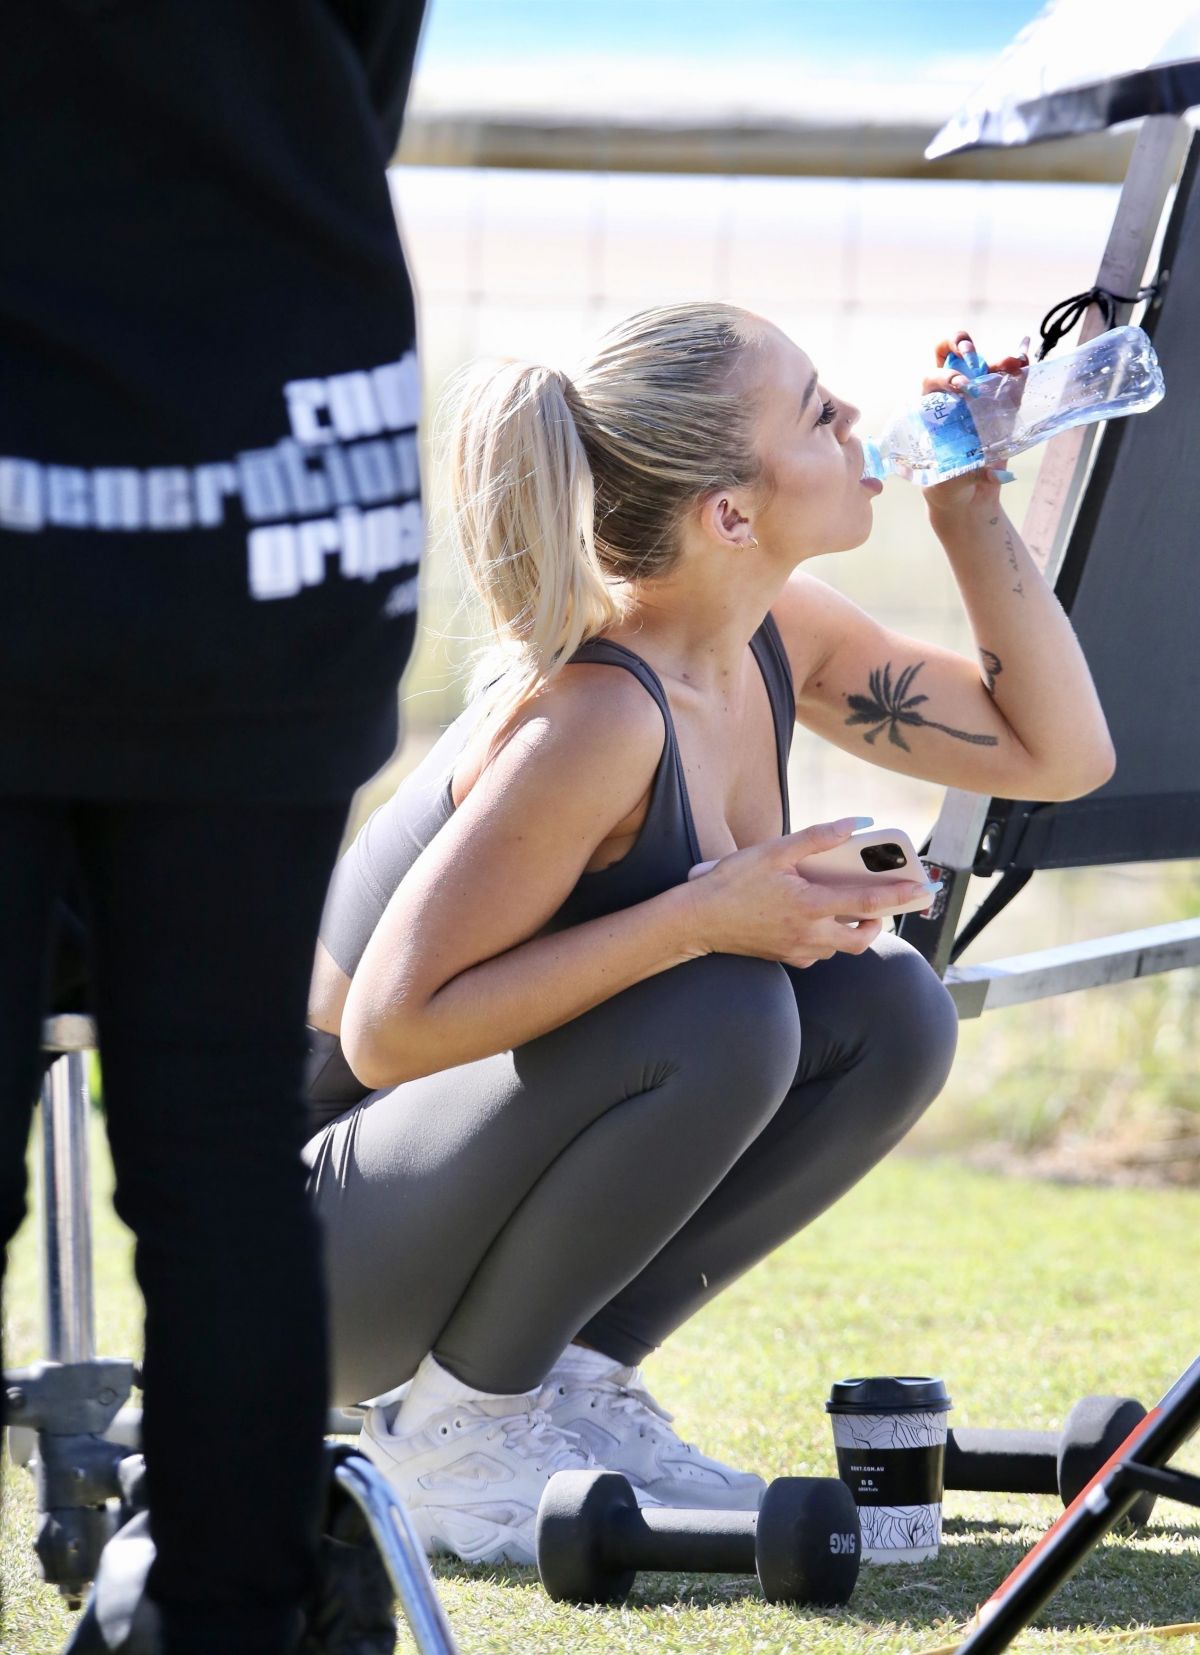 Tammy Hembrow Filming Her Fitness App at Mermaid Beach at Gold Coast 2020/06/04